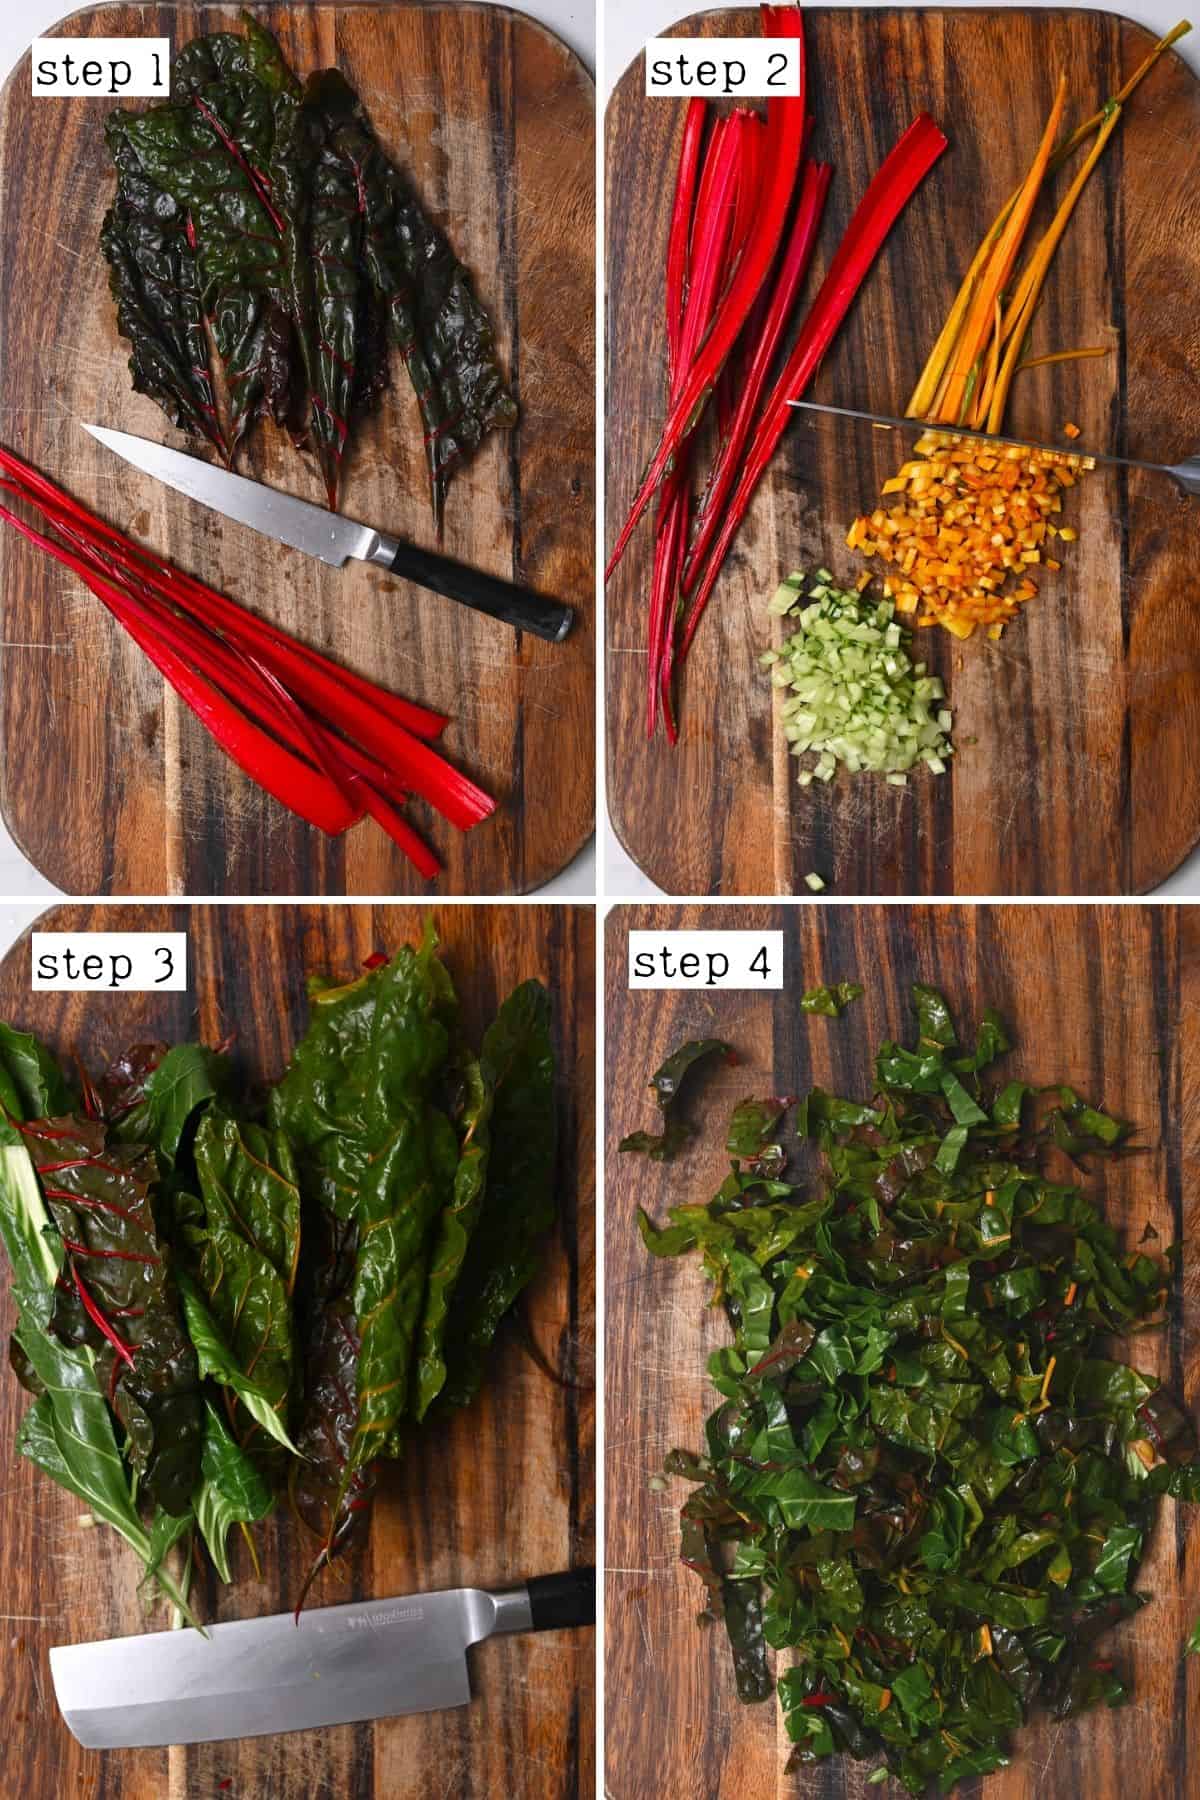 Steps for preparing chard stems and leaves